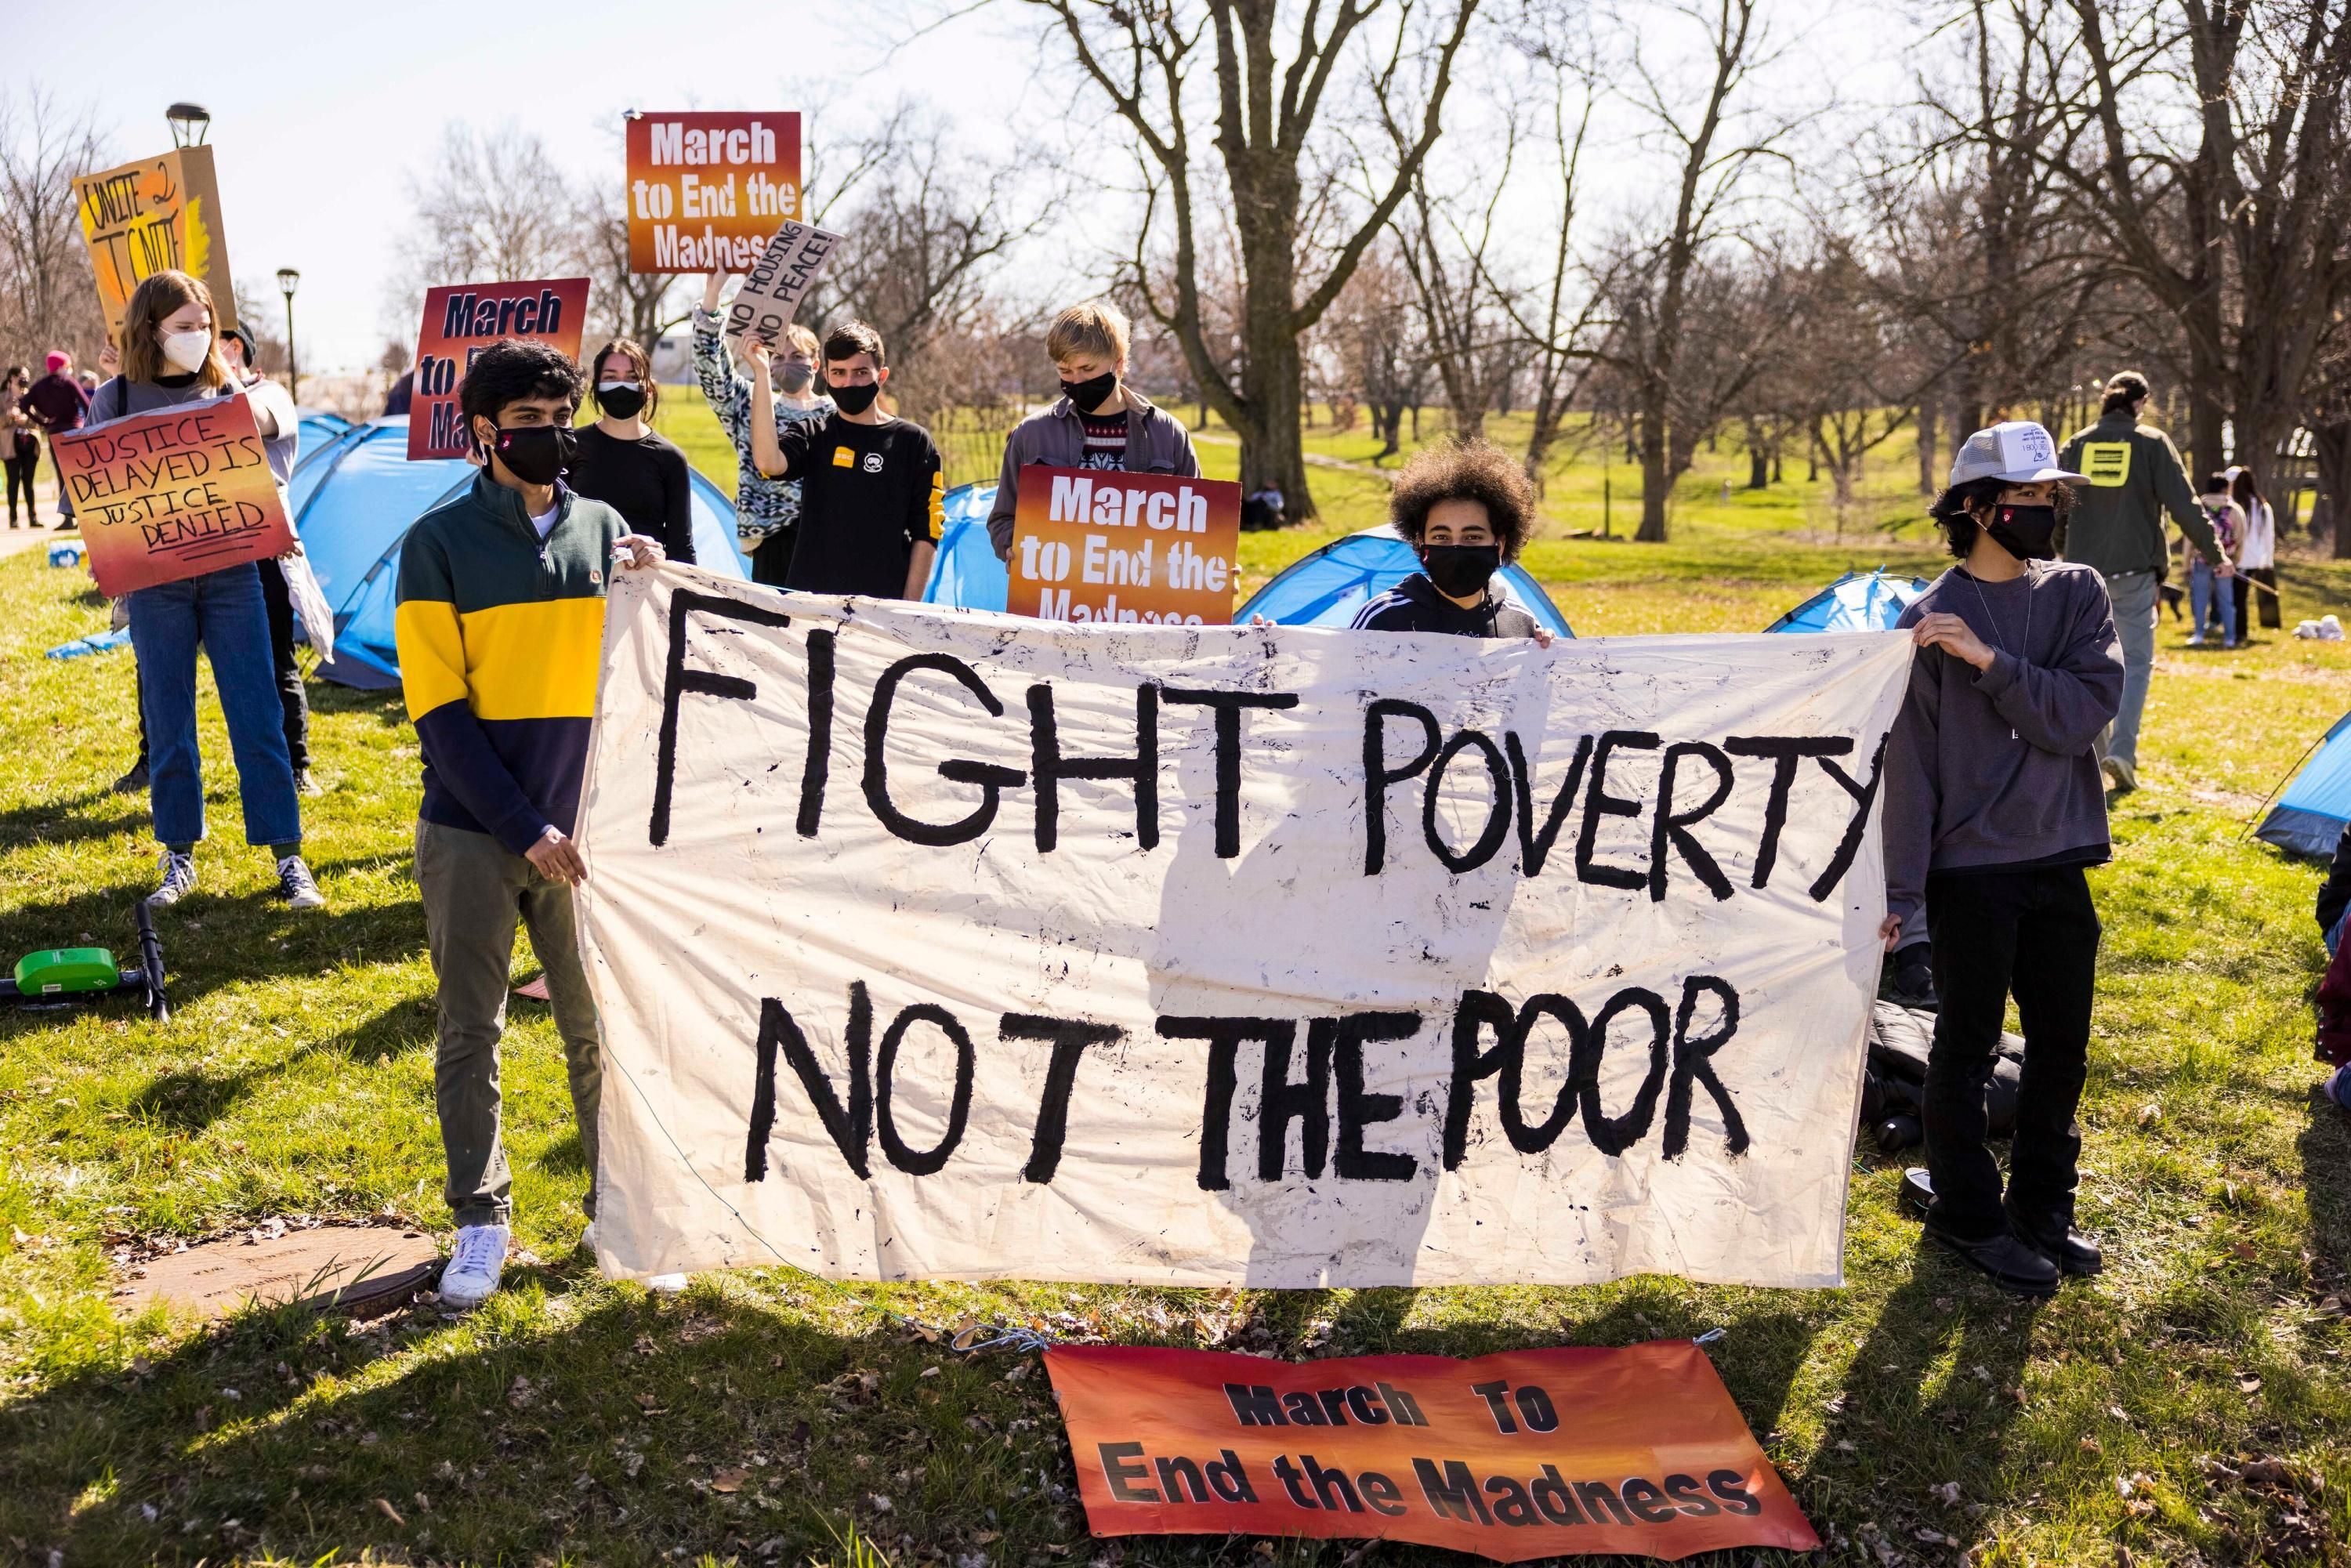 fight_poverty_not_poor